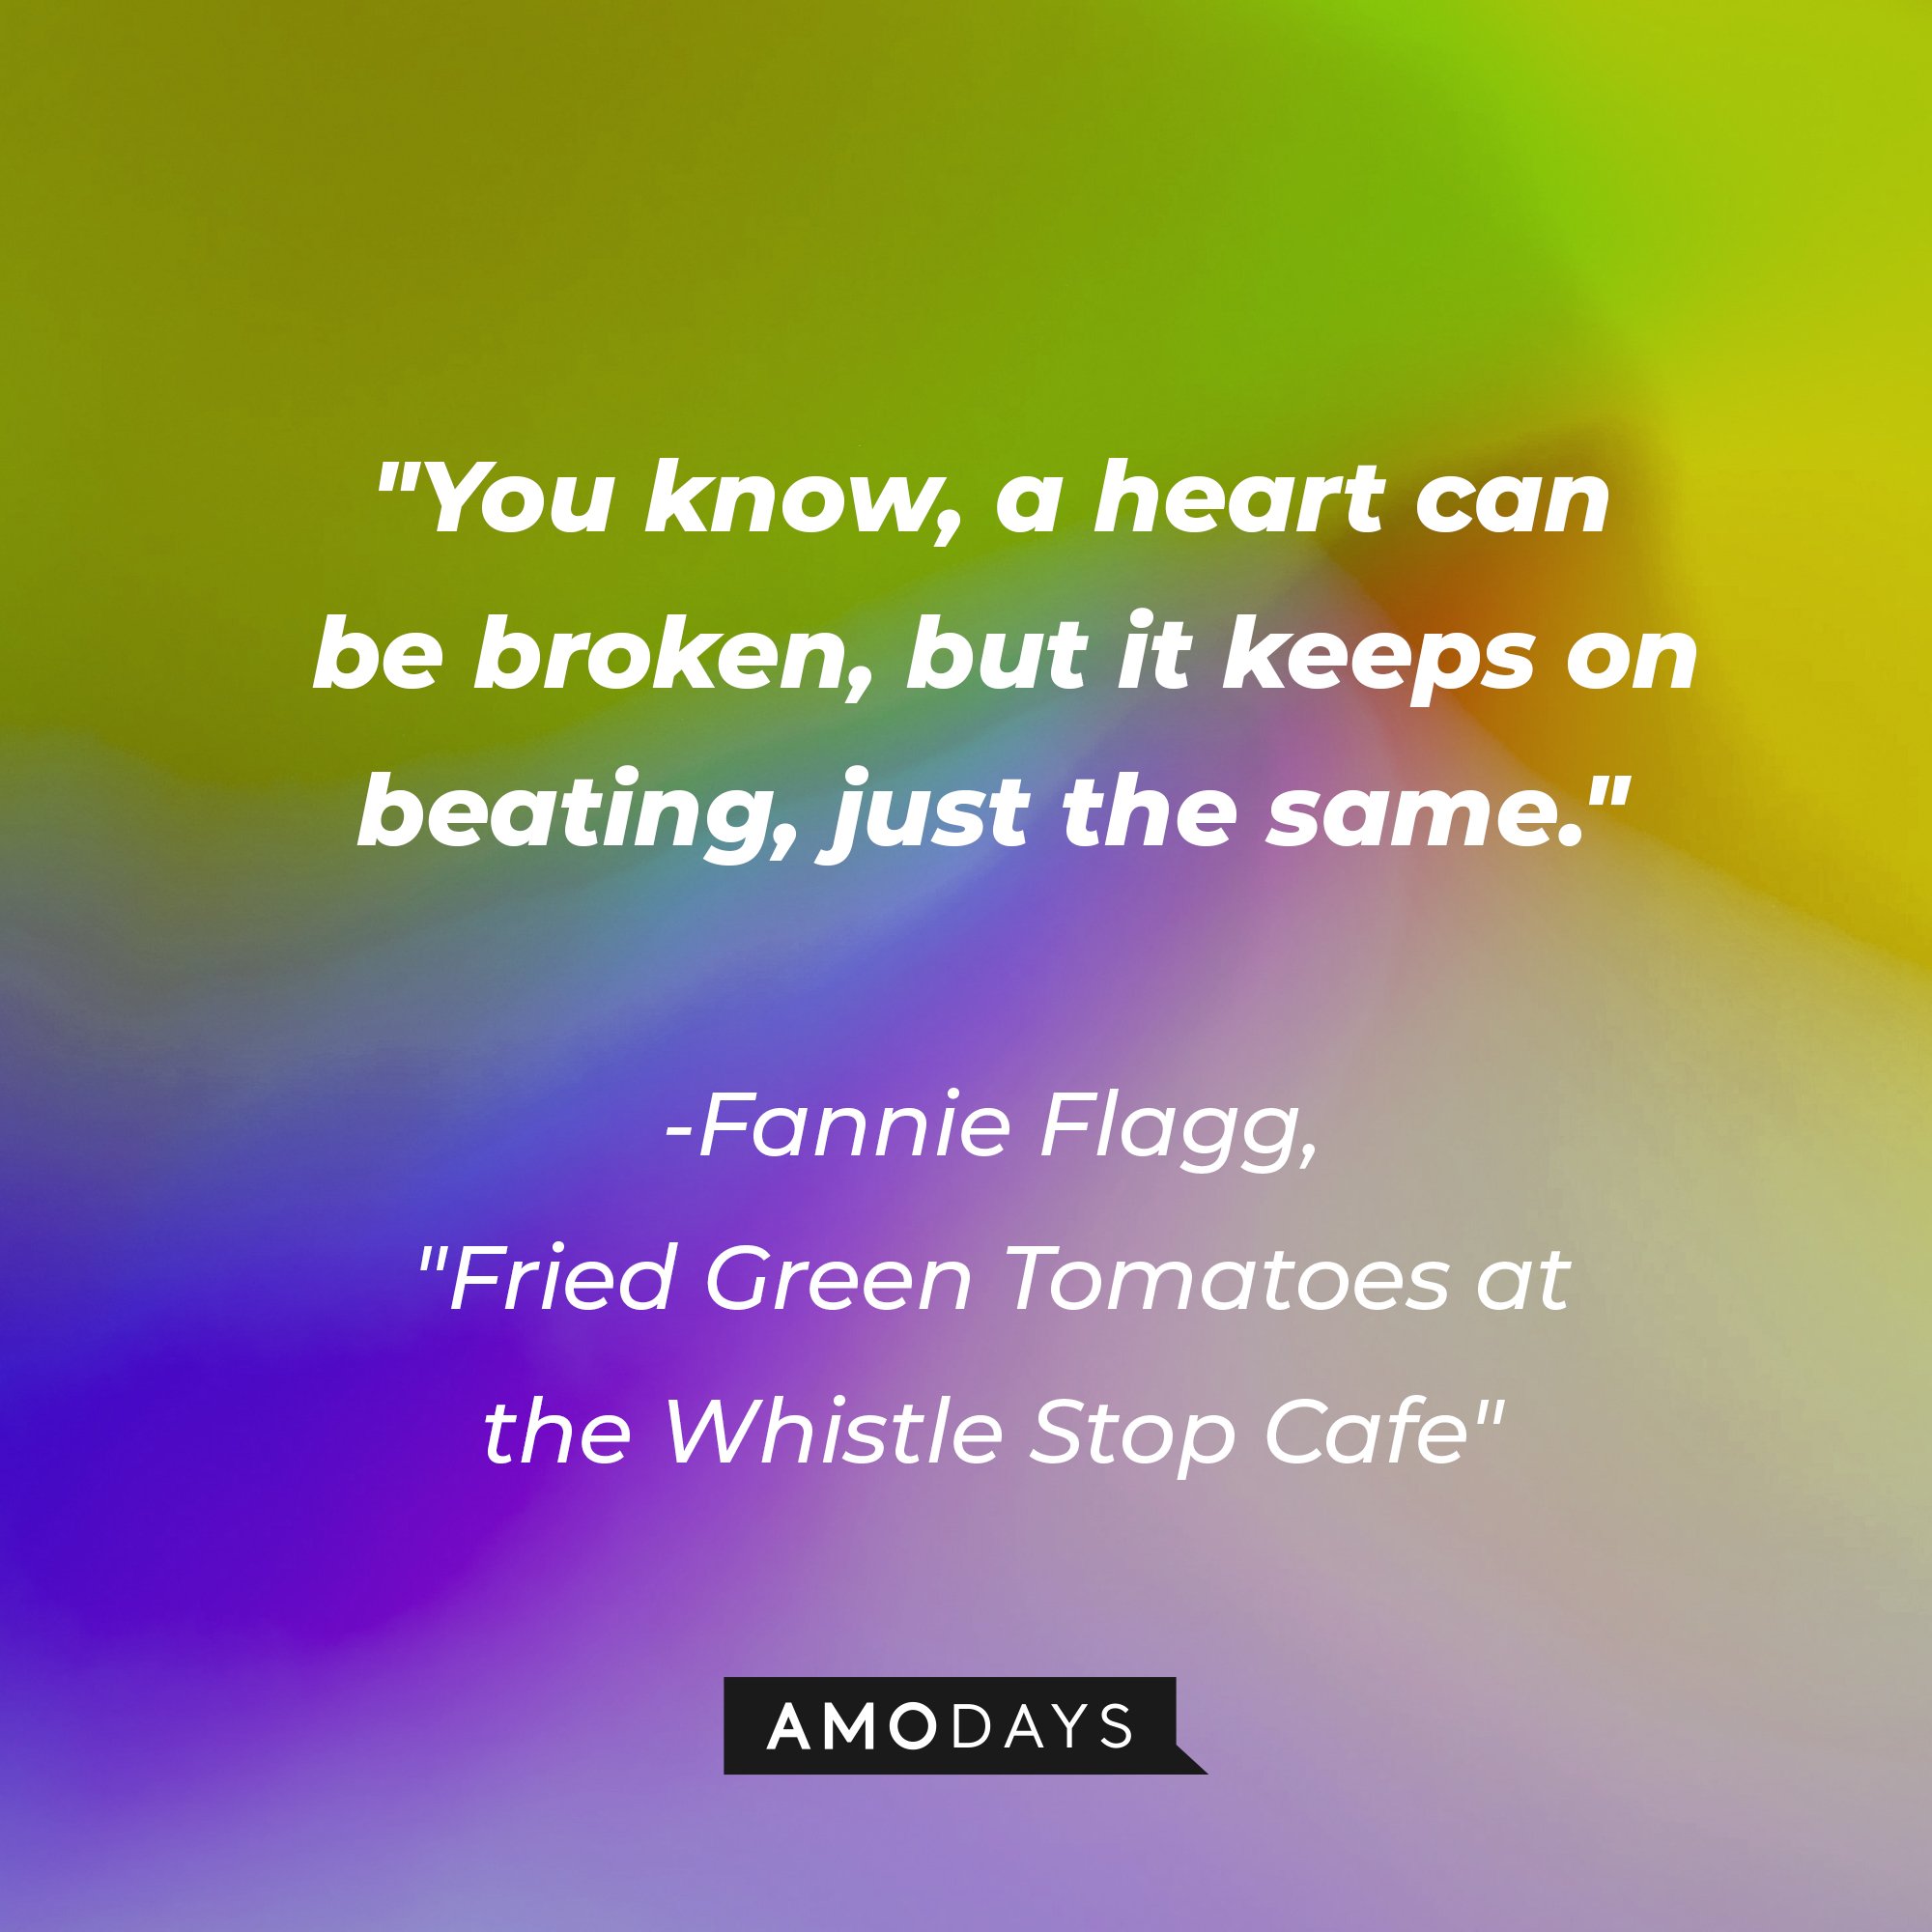 Fannie Flagg's "Fried Green Tomatoes at the Whistle Stop Cafe" quote: "You know, a heart can be broken, but it keeps on beating, just the same." | Image: AmoDays